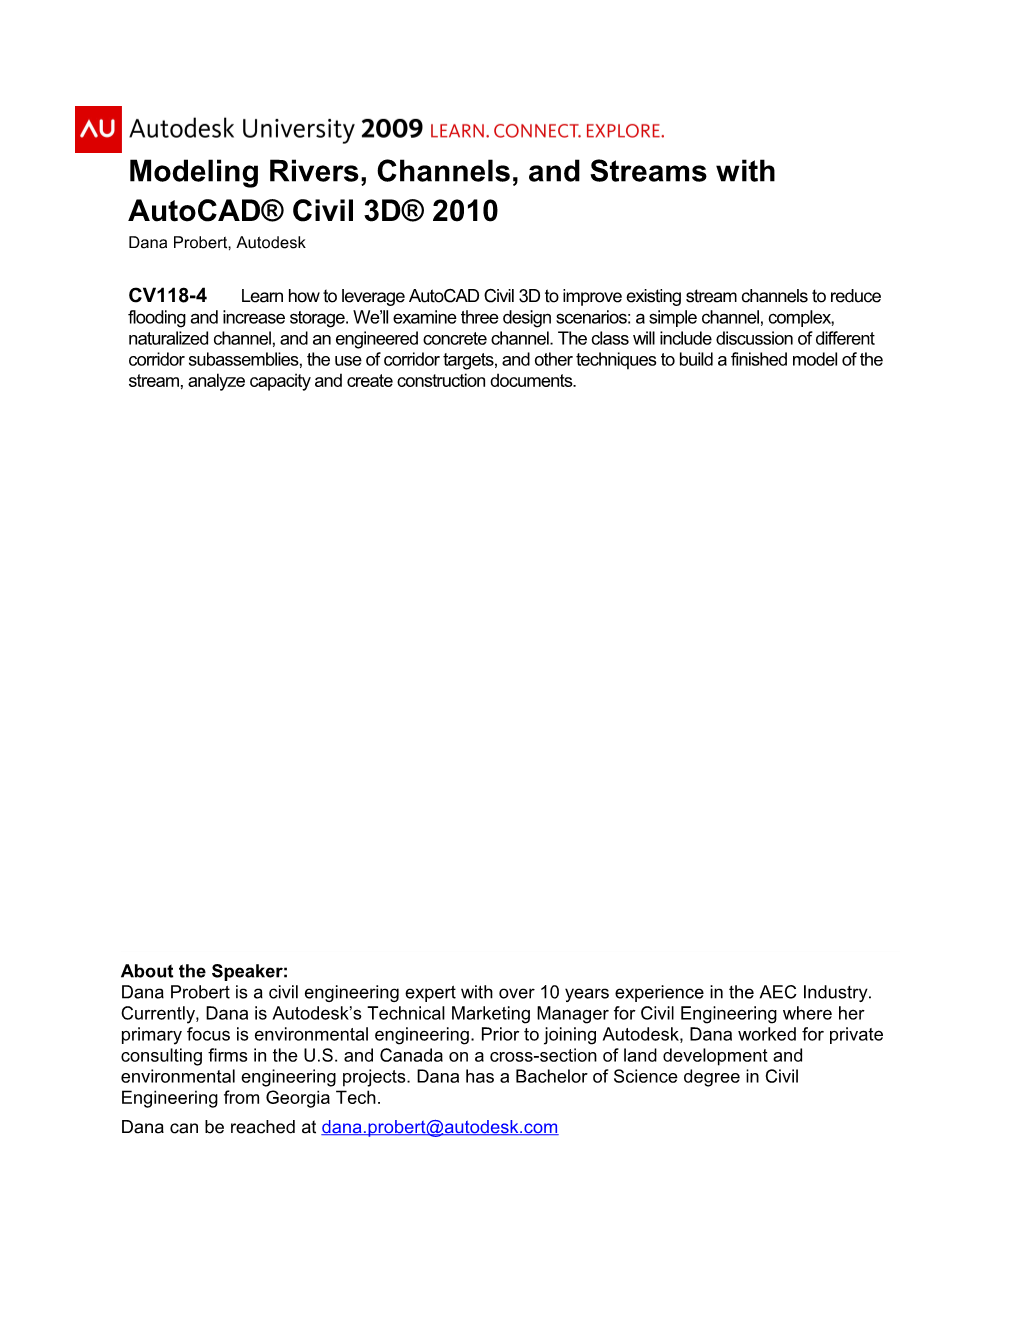 Modeling Rivers, Channels and Streams with Autocad Civil 3D 2010